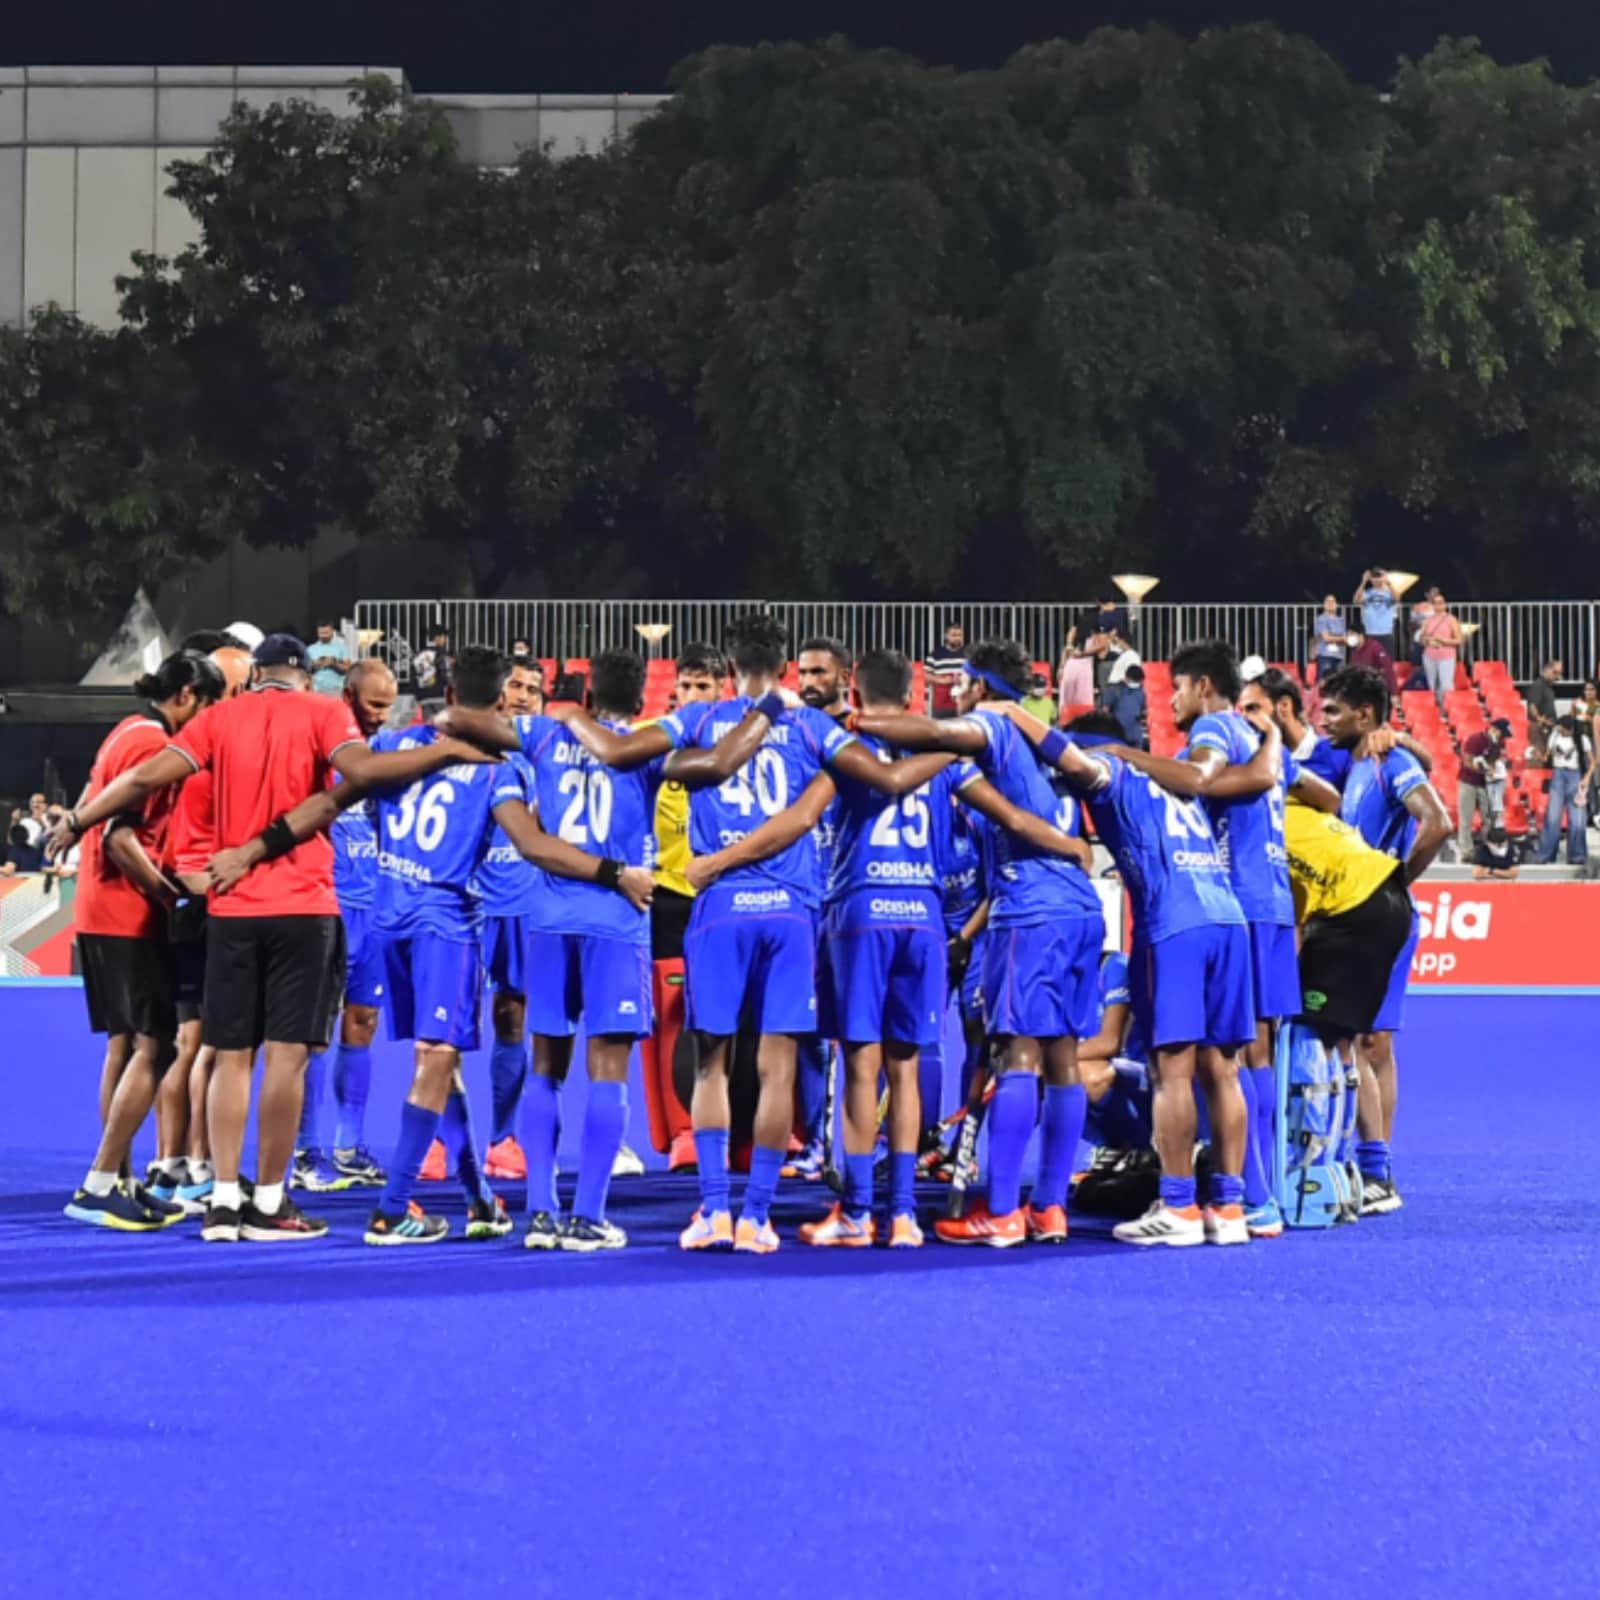 India vs Netherlands Live Streaming When and Where to Watch IND vs NED FIH Pro League Hockey match Live Coverage on Live TV Online